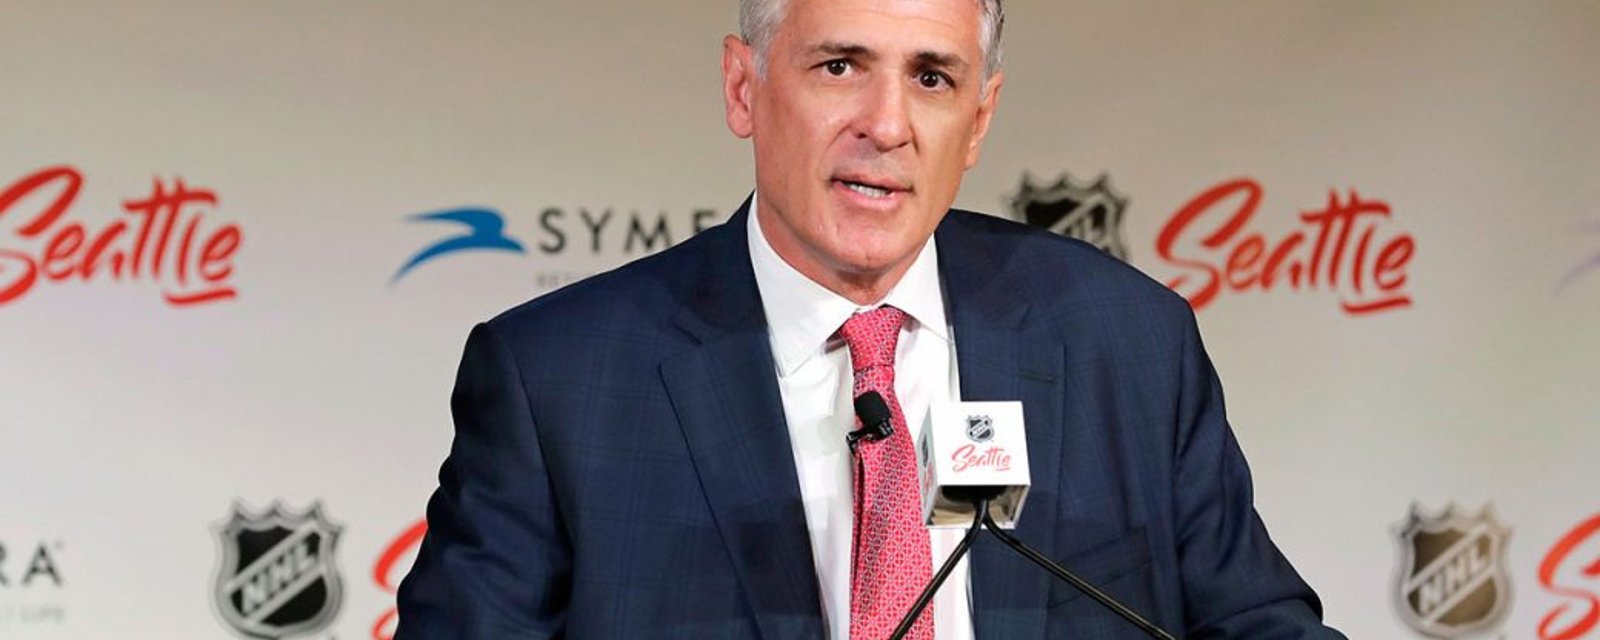 Ron Francis admits the flat cap has given Seattle an edge in the expansion draft.